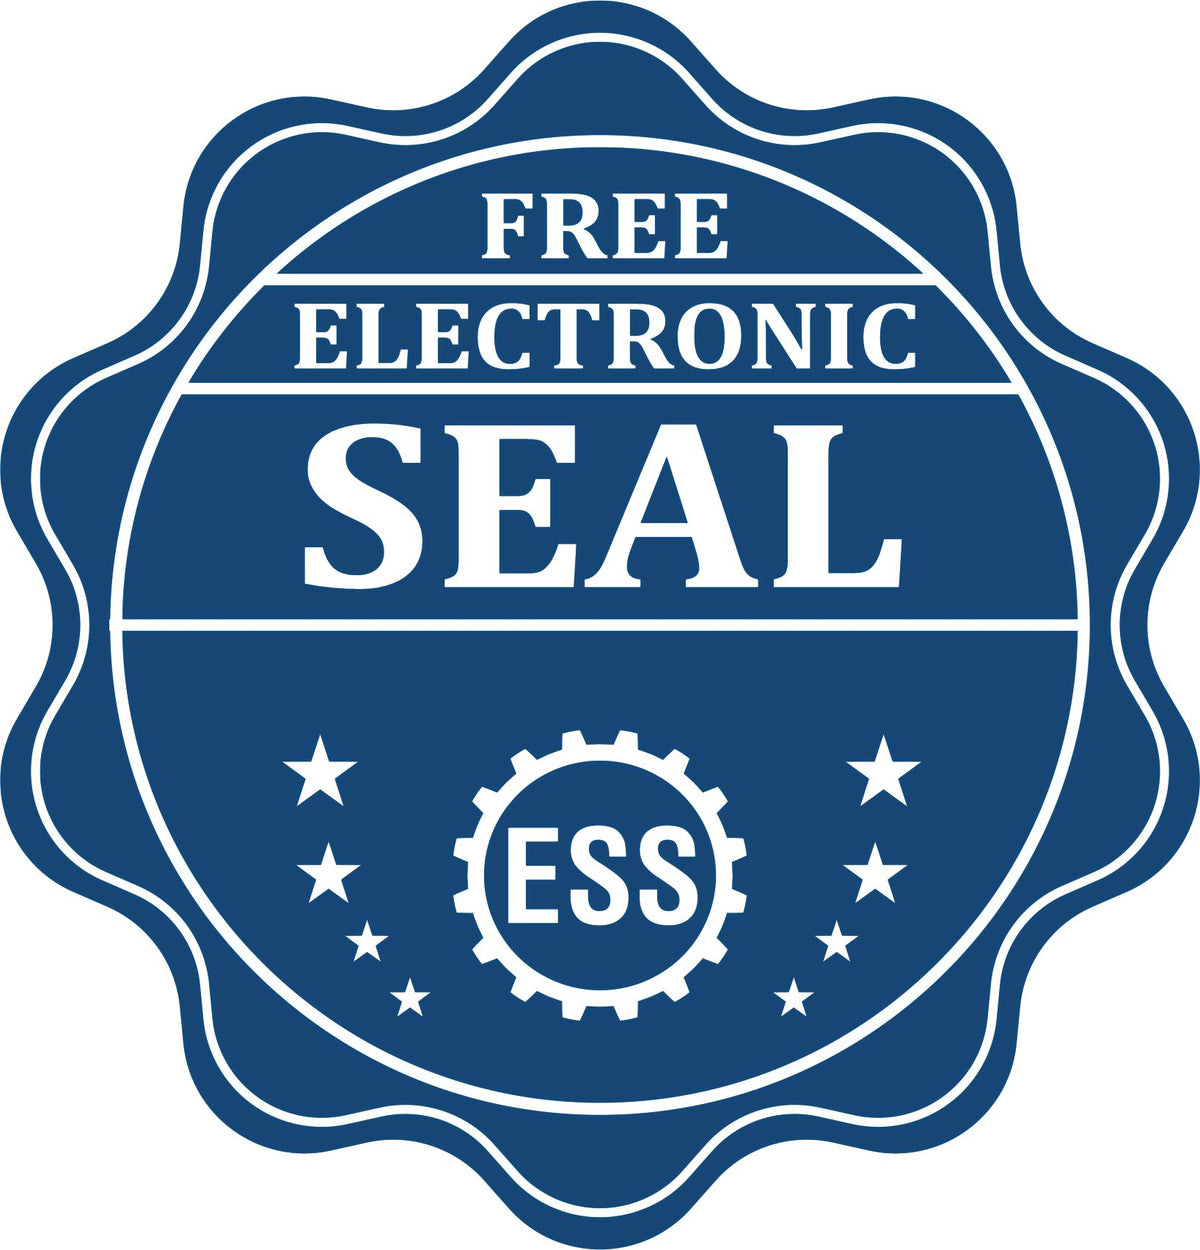 A badge showing a free electronic seal for the Gift Nevada Land Surveyor Seal with stars and the ESS gear on the emblem.